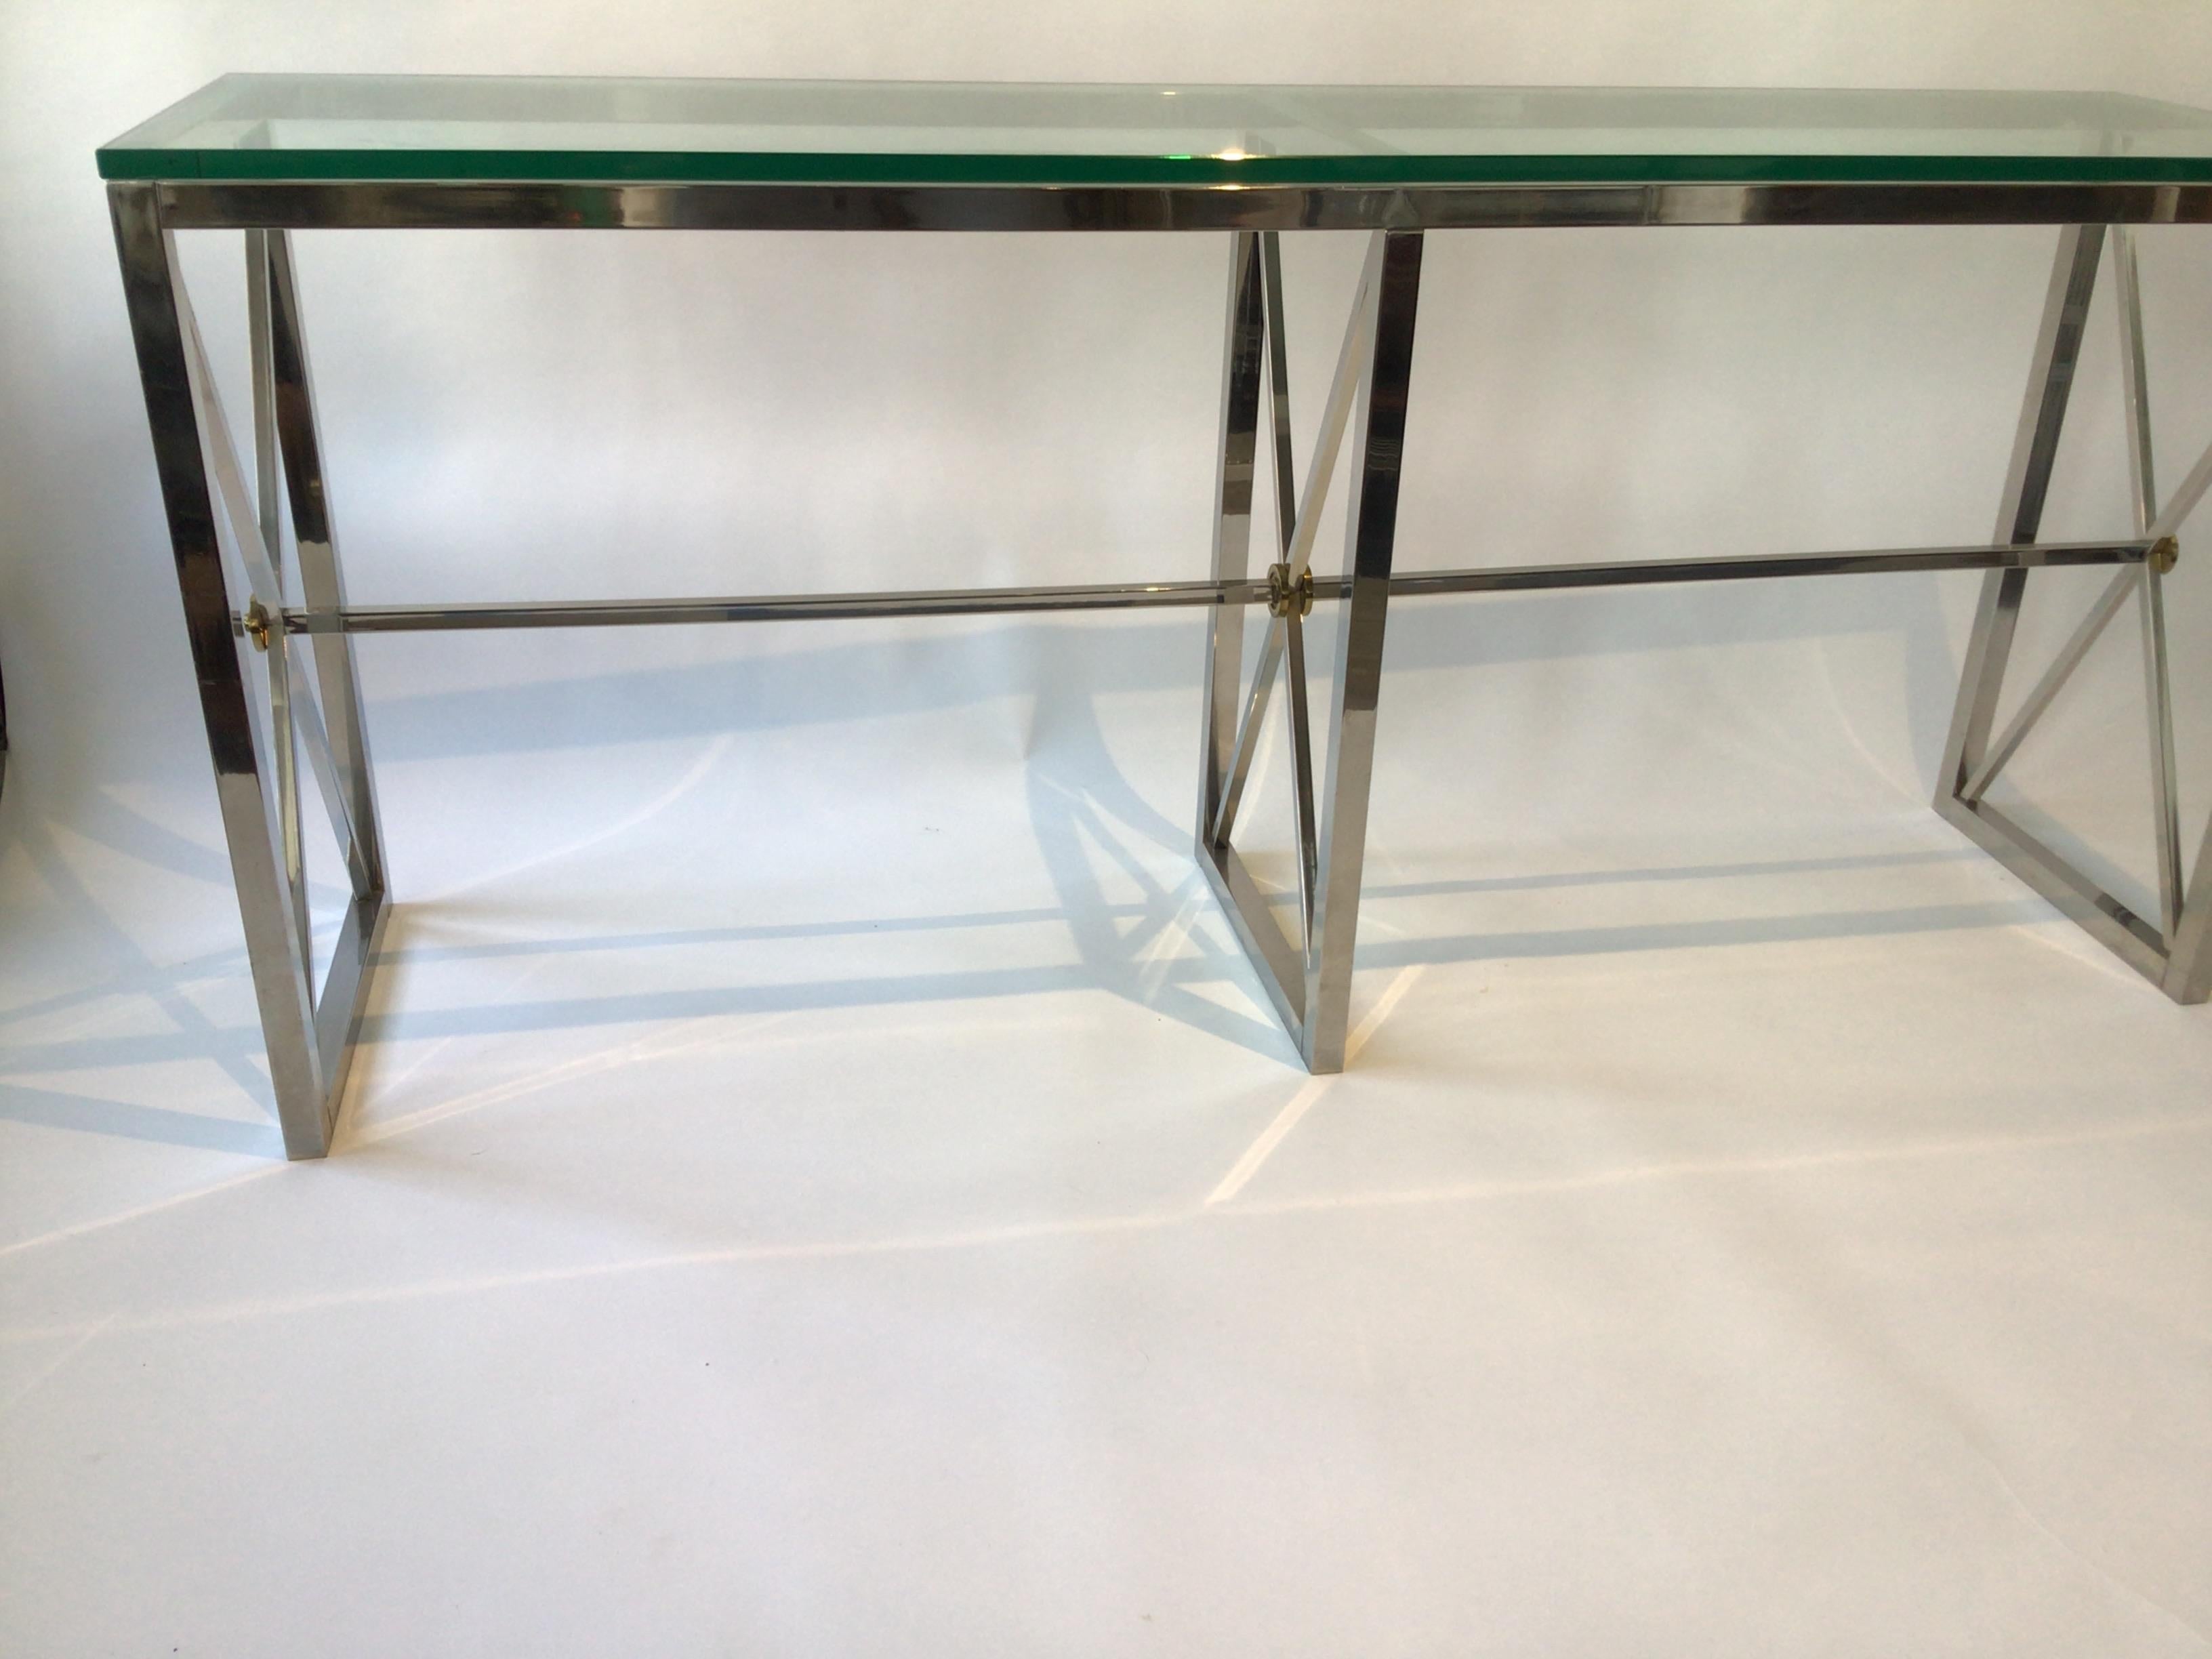 1980s Chrome Neo Classical console. Chrome base, brass accents, thick glass top.